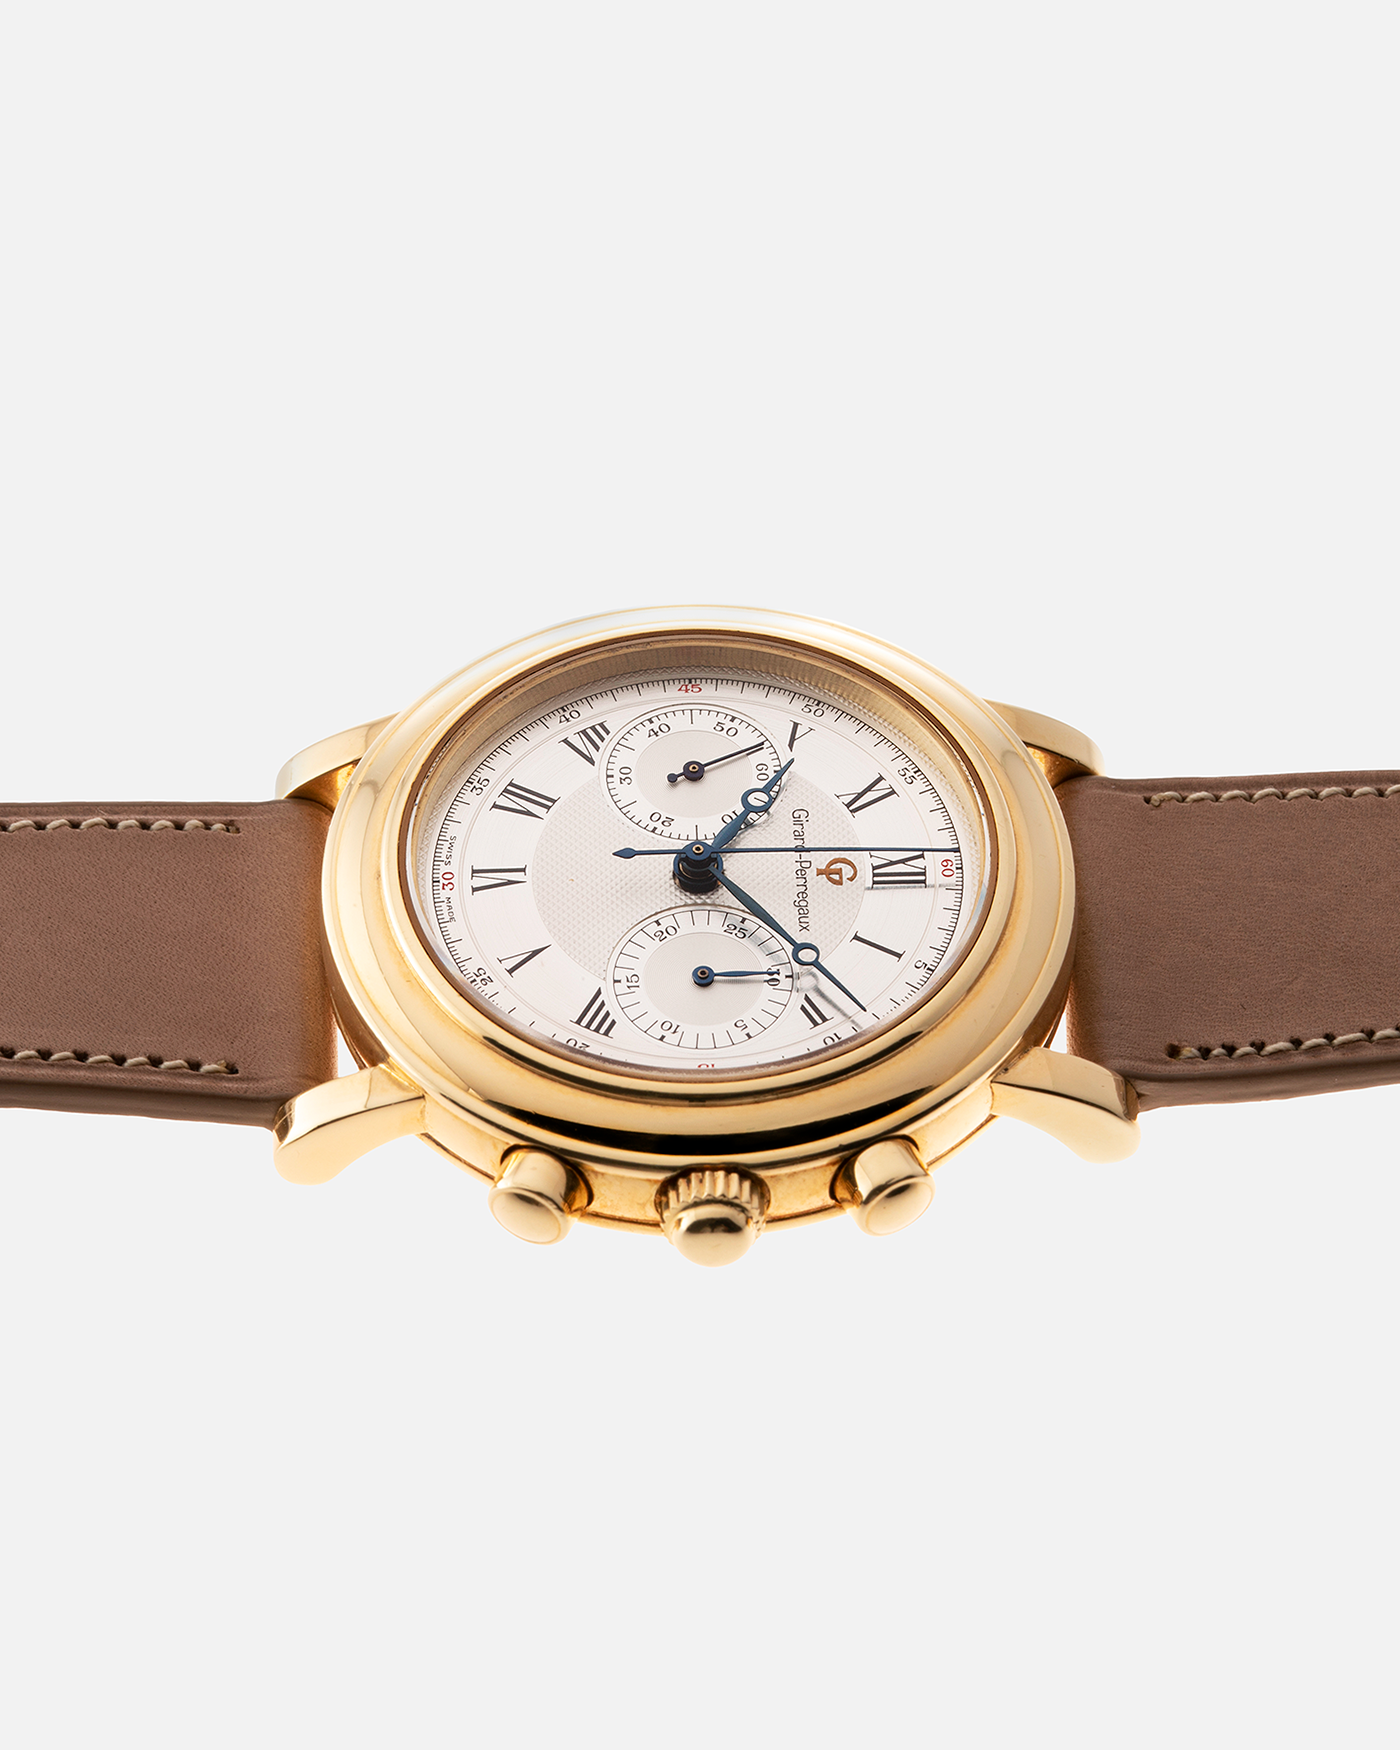 Brand: Girard Perregaux Year: 1990’s Reference Number: 47930 Material: 18k Yellow Gold Movement: Lemania Cal. 1872  Case Diameter: 38mm Strap: Nostime Tan Strap and 18k Yellow Gold Girard Perregaux Tan Buckle